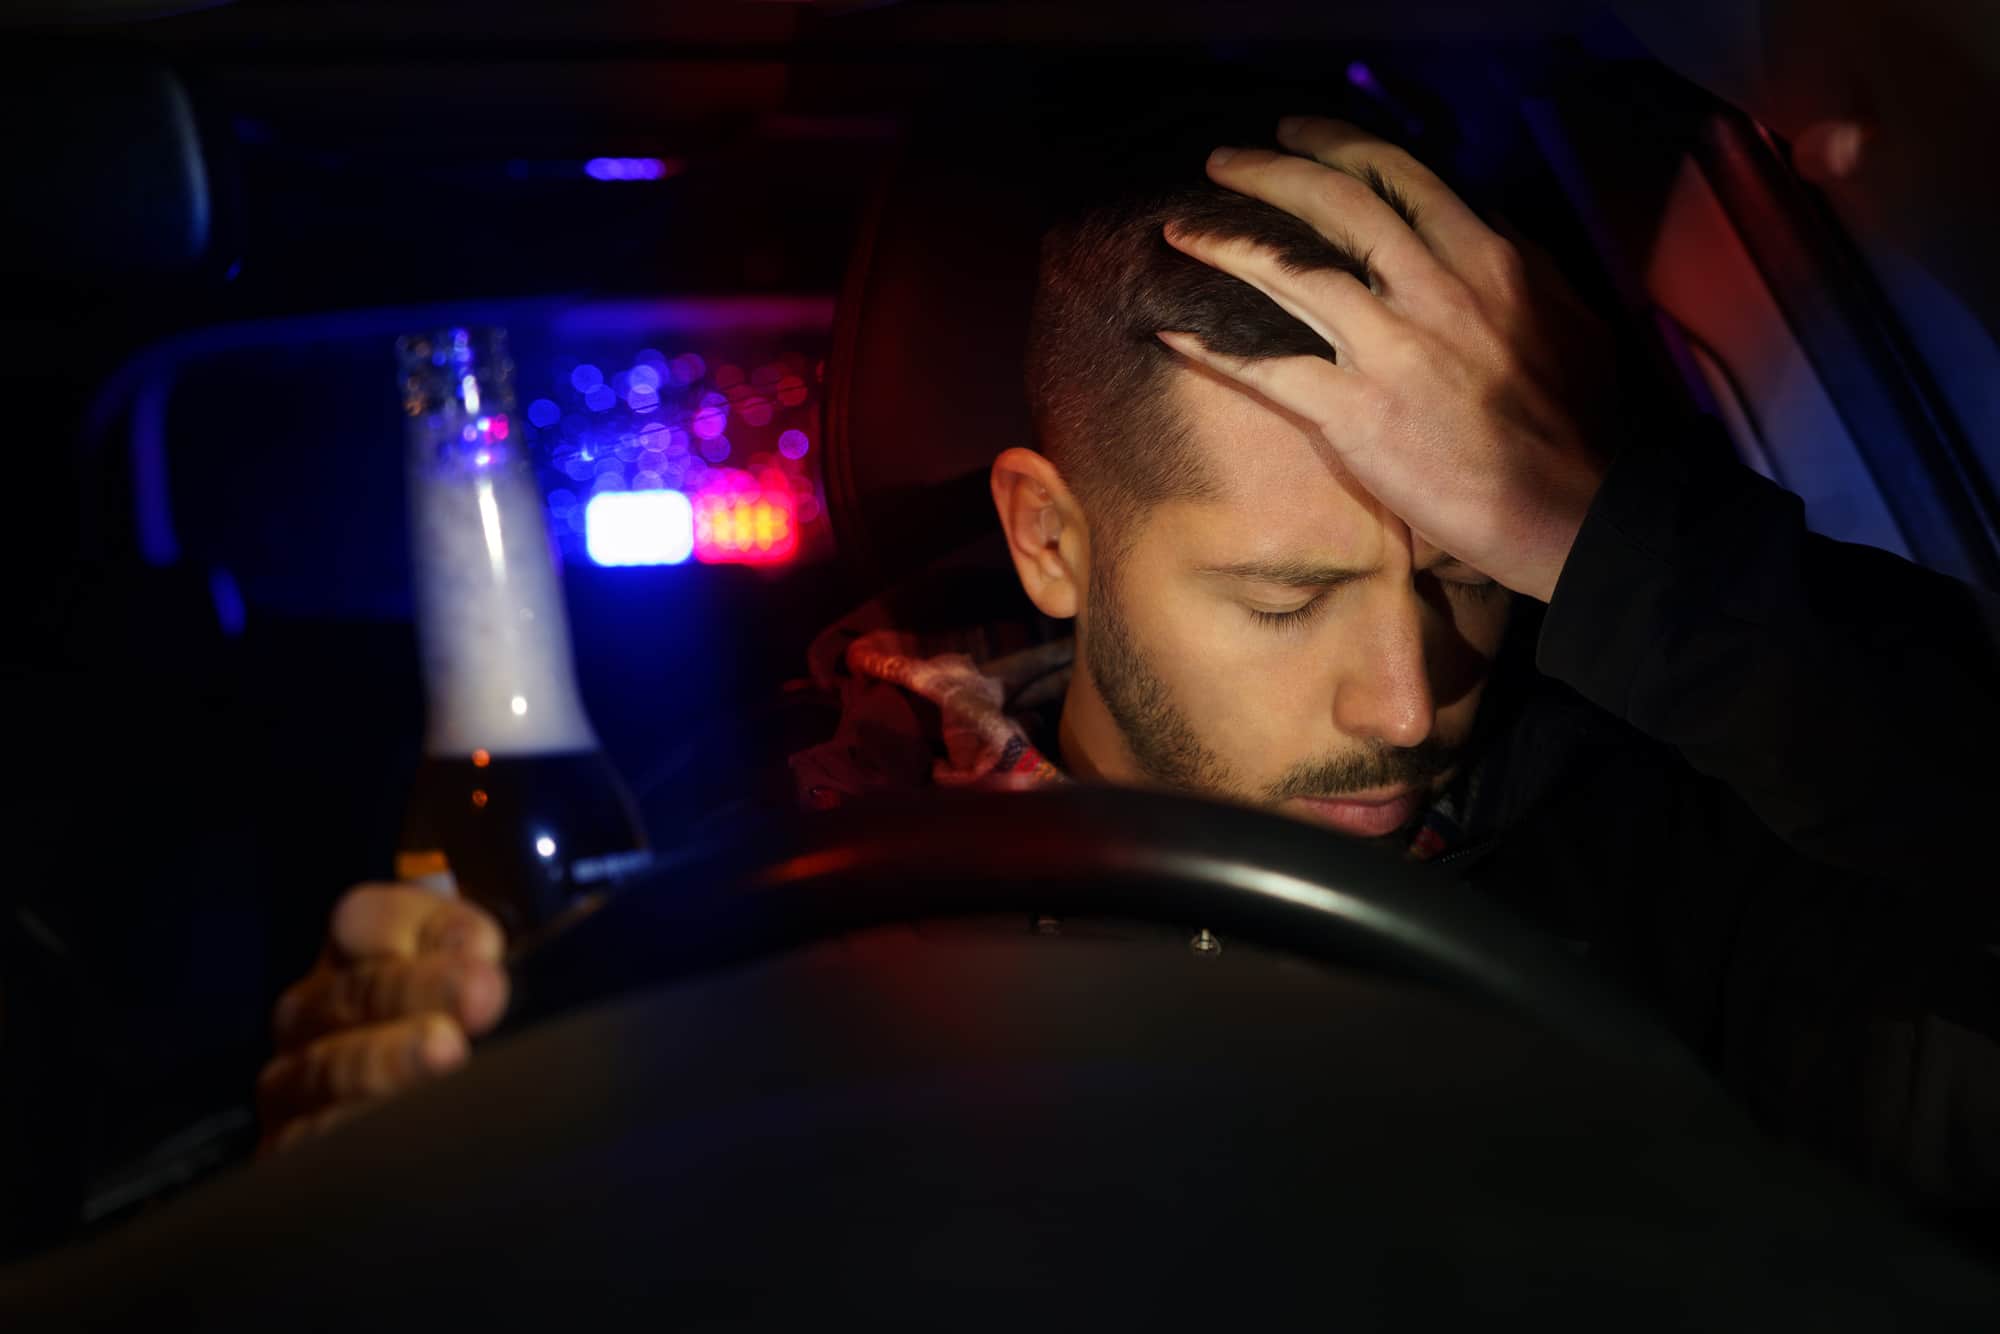 Concerned Man Pulled Over for DUI drunk driving